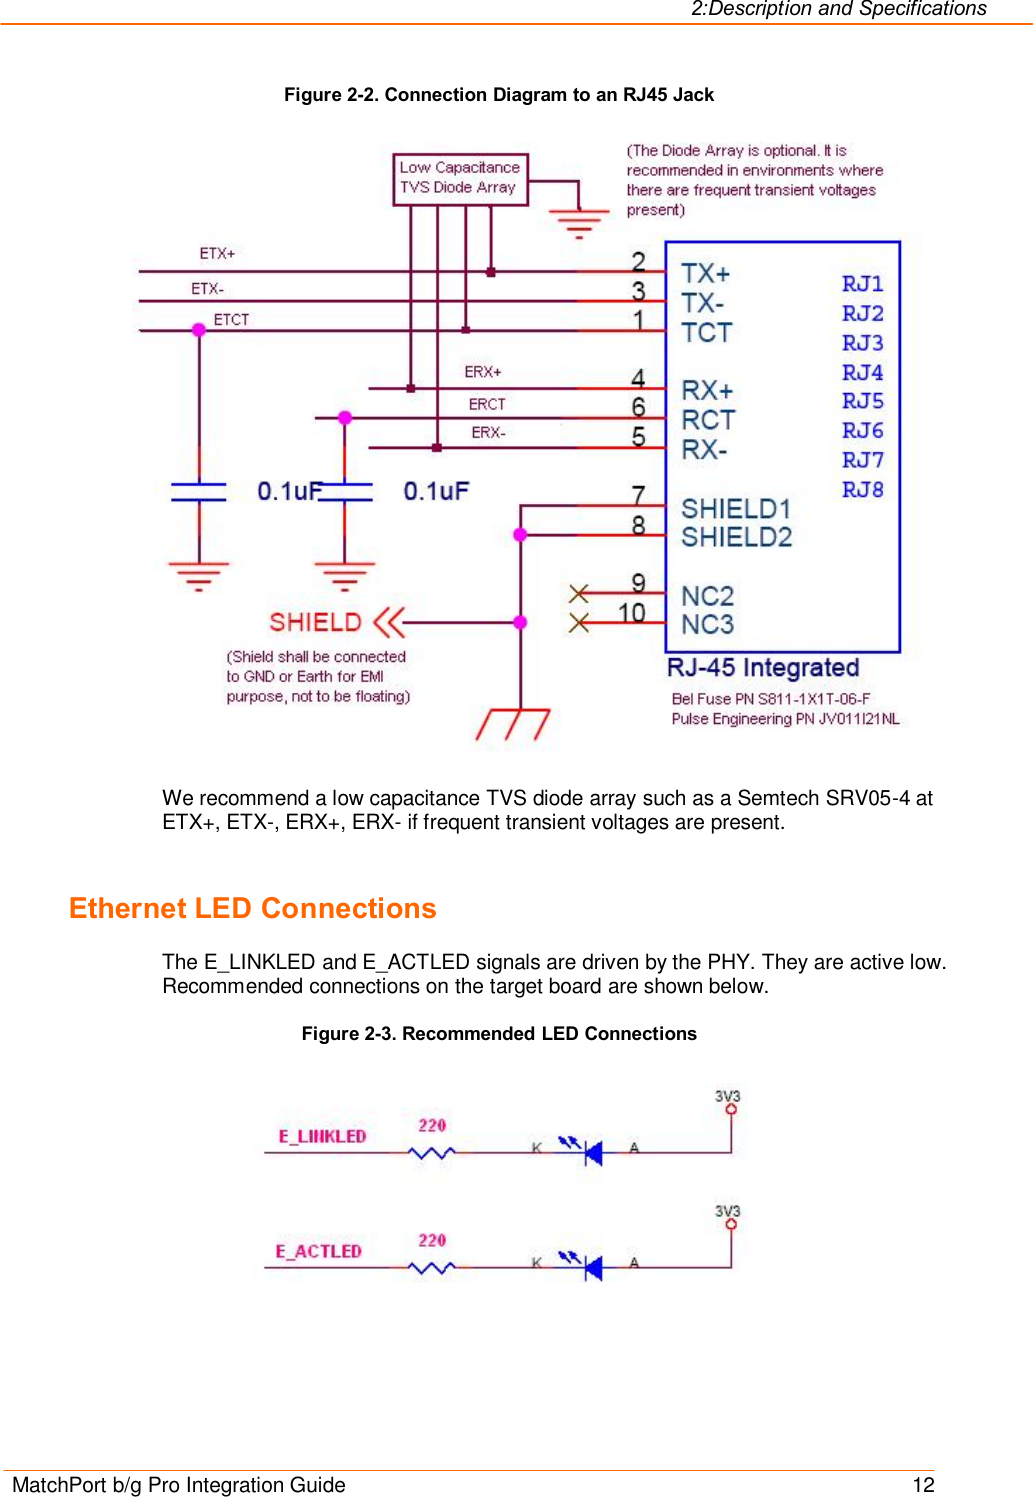 2:Description and Specifications MatchPort b/g Pro Integration Guide    12 Figure 2-2. Connection Diagram to an RJ45 Jack    We recommend a low capacitance TVS diode array such as a Semtech SRV05-4 at ETX+, ETX-, ERX+, ERX- if frequent transient voltages are present.  Ethernet LED Connections The E_LINKLED and E_ACTLED signals are driven by the PHY. They are active low. Recommended connections on the target board are shown below. Figure 2-3. Recommended LED Connections       